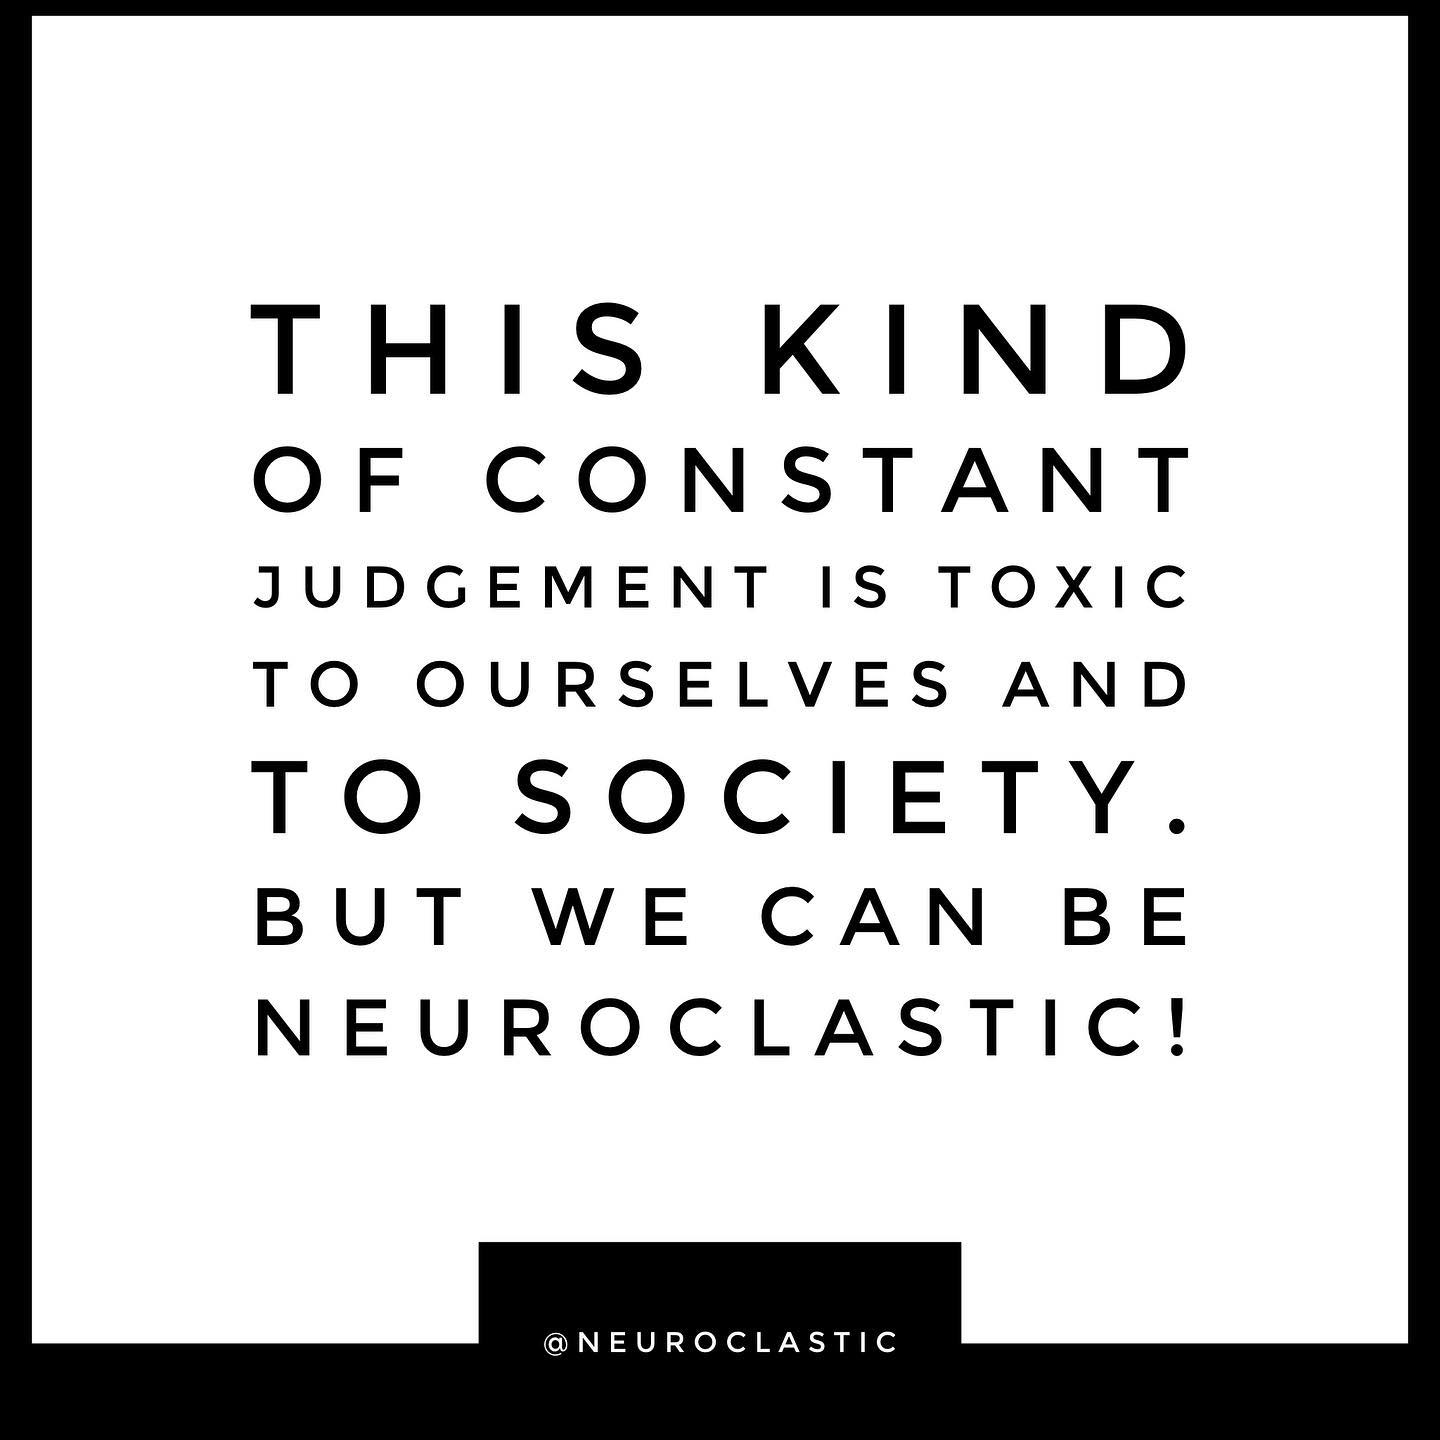 This kind of constant judgement is toxic to ourselves and to society. But we can be NeuroClastic! @NeuroClastic